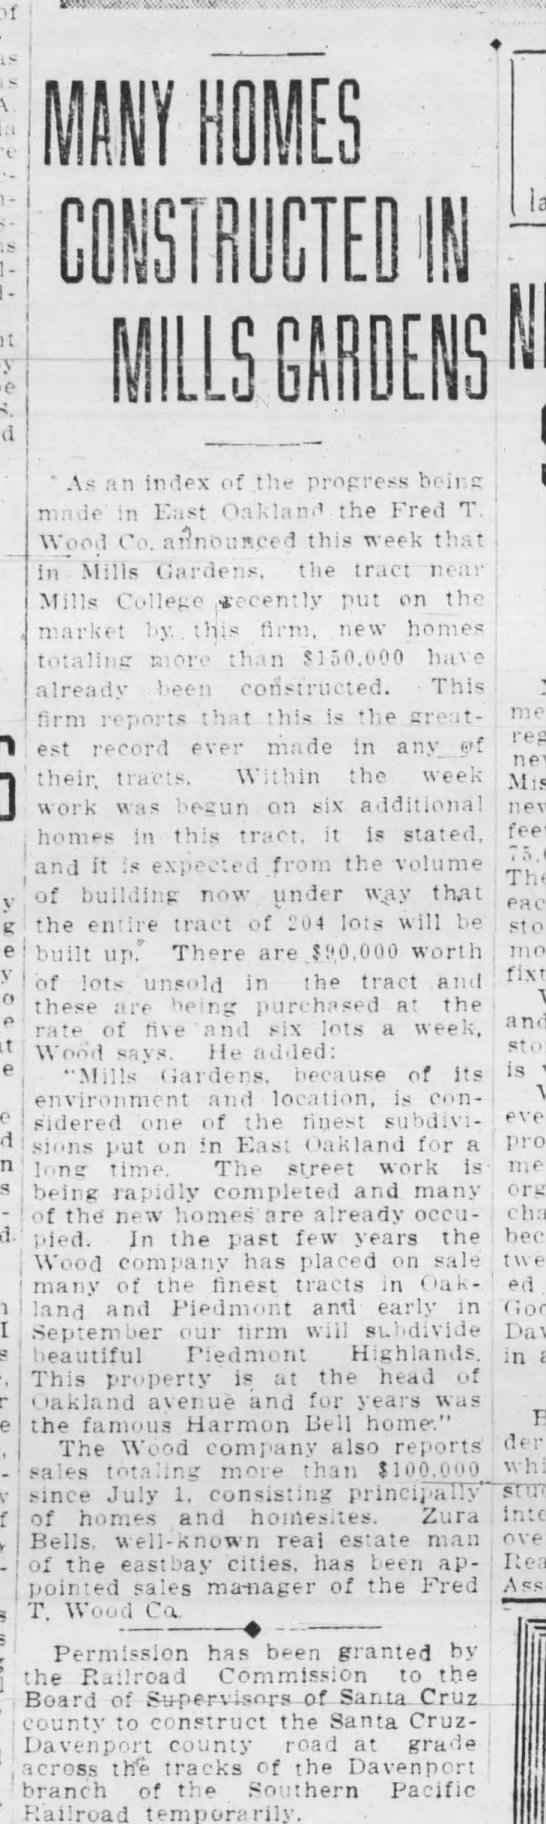 Many Homes Constructed - Oakland Tribune Aug 03, 1924 Mills Gardens - 